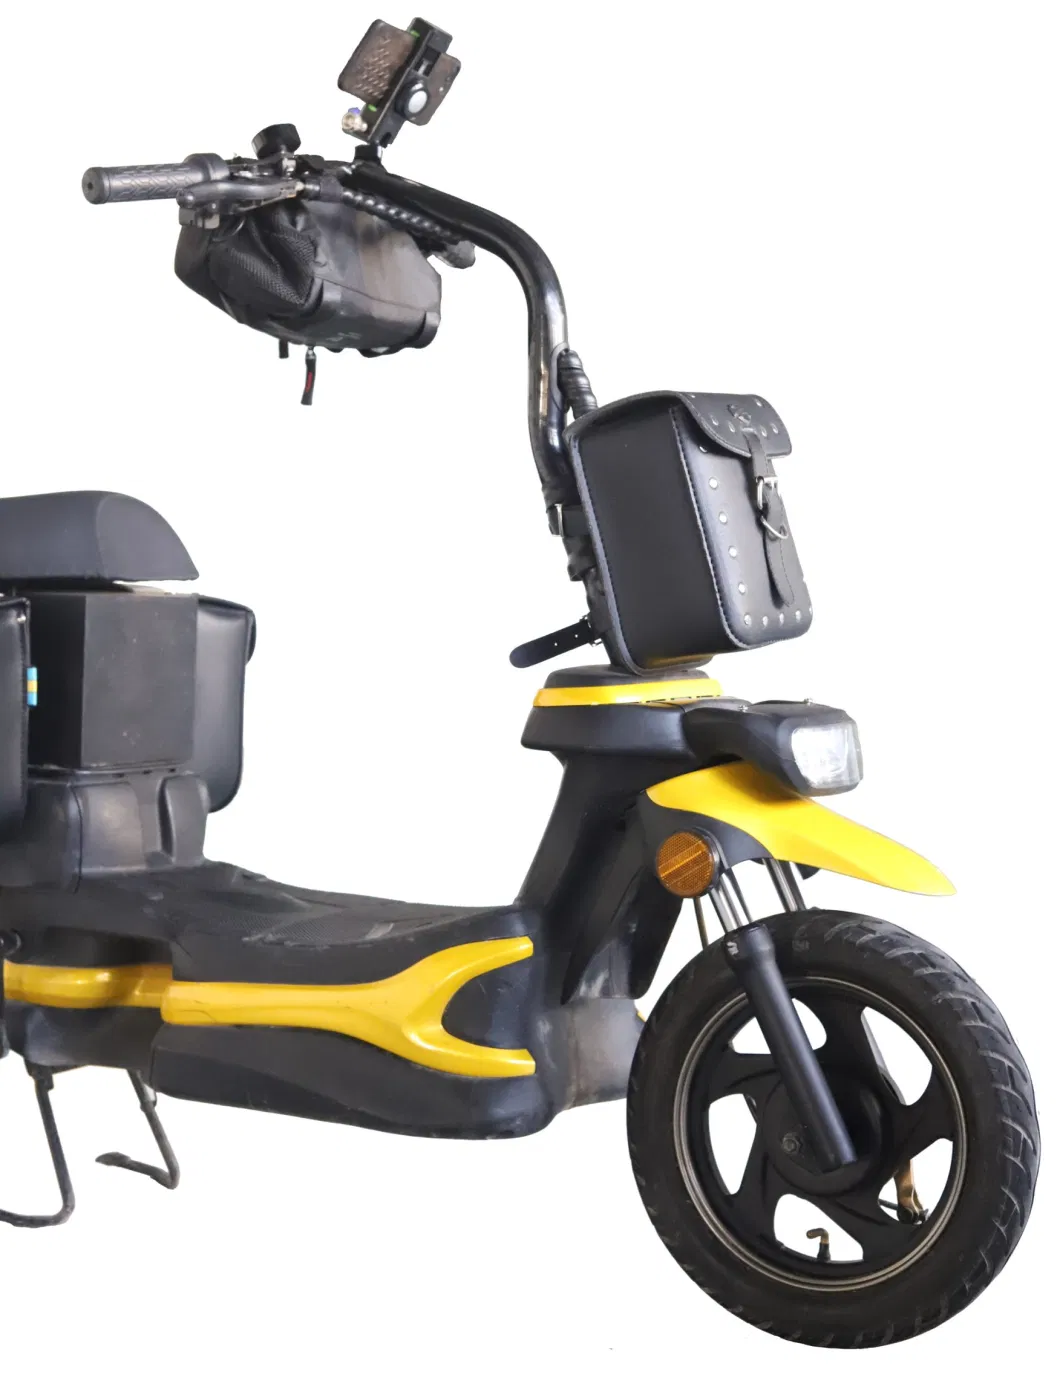 E-Bike, Electric Bicycle, Standard Electric Bicycle, Electric Scooter with Pedal